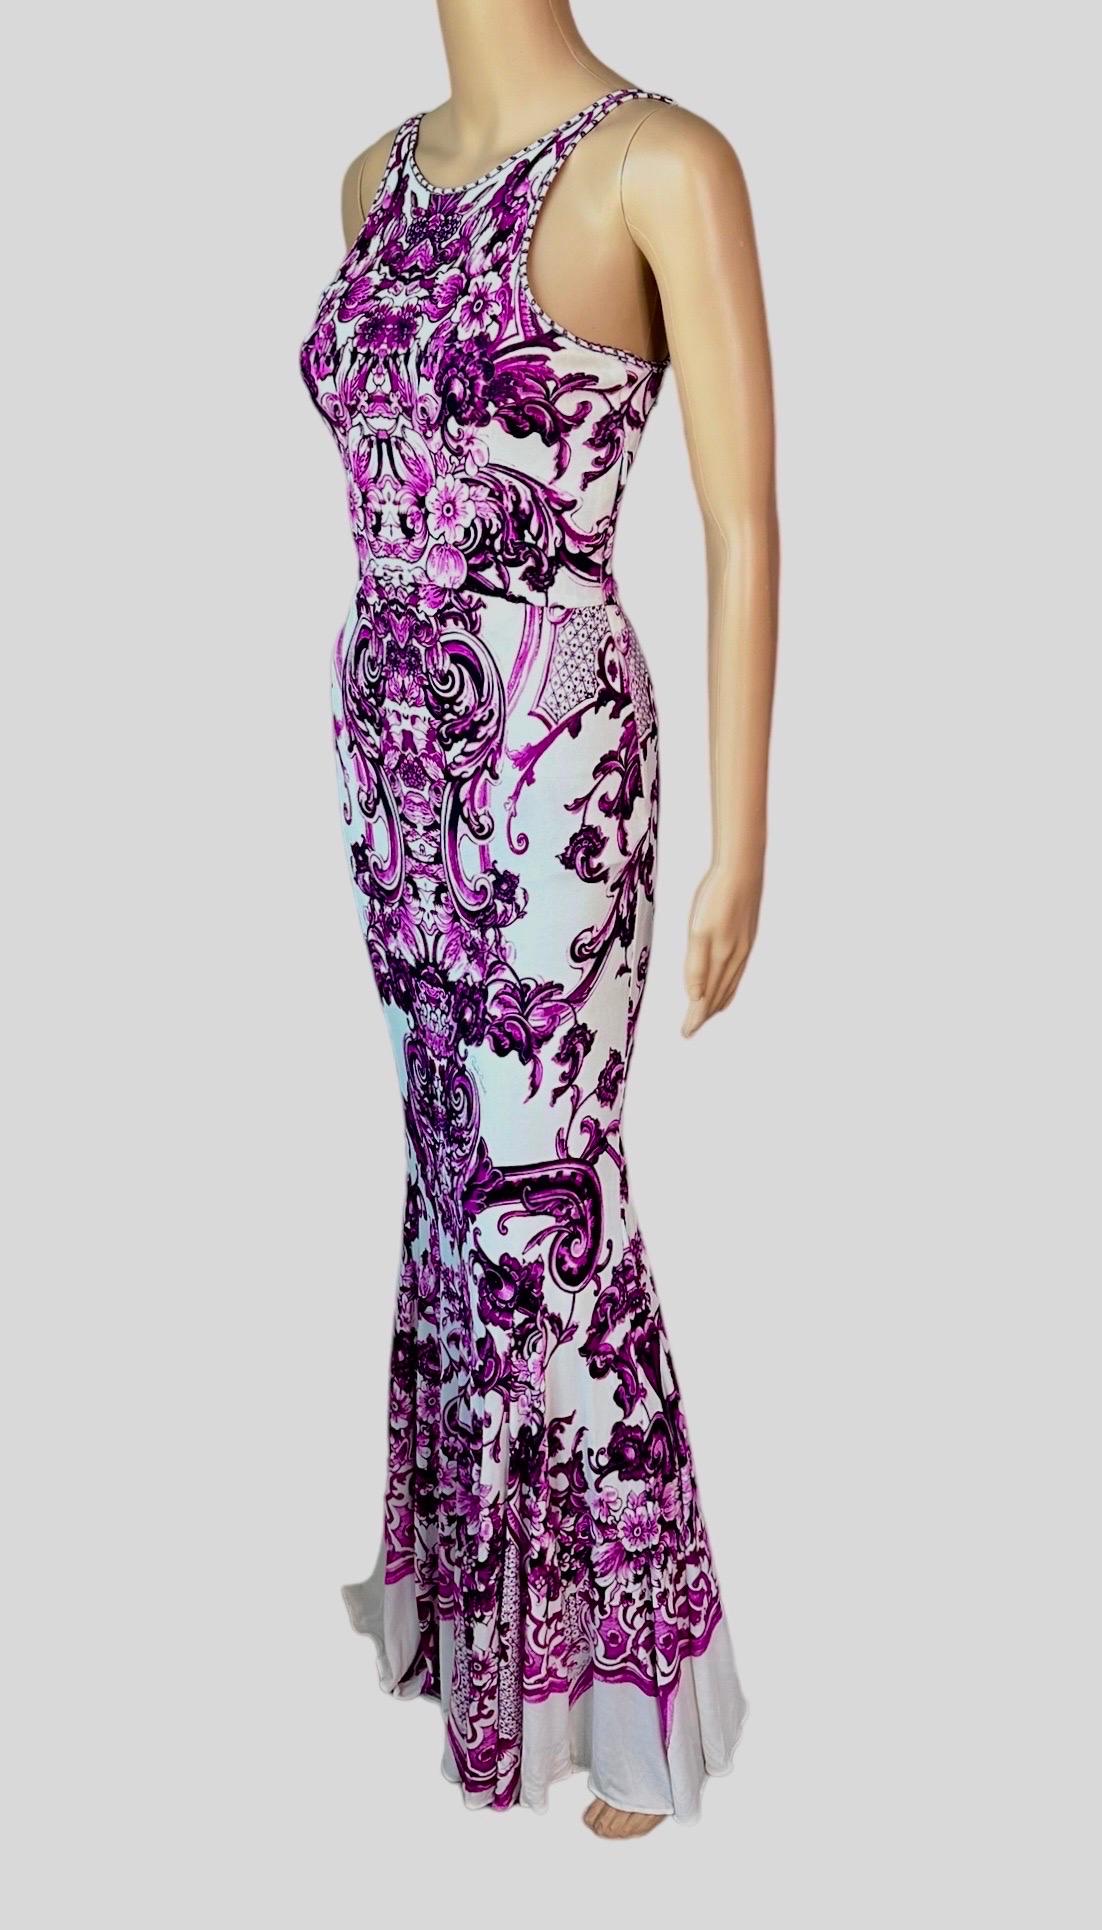 Gray Roberto Cavalli Resort 2013 Chinoiserie Ming Porcelain Sheer Lace Evening Dress For Sale